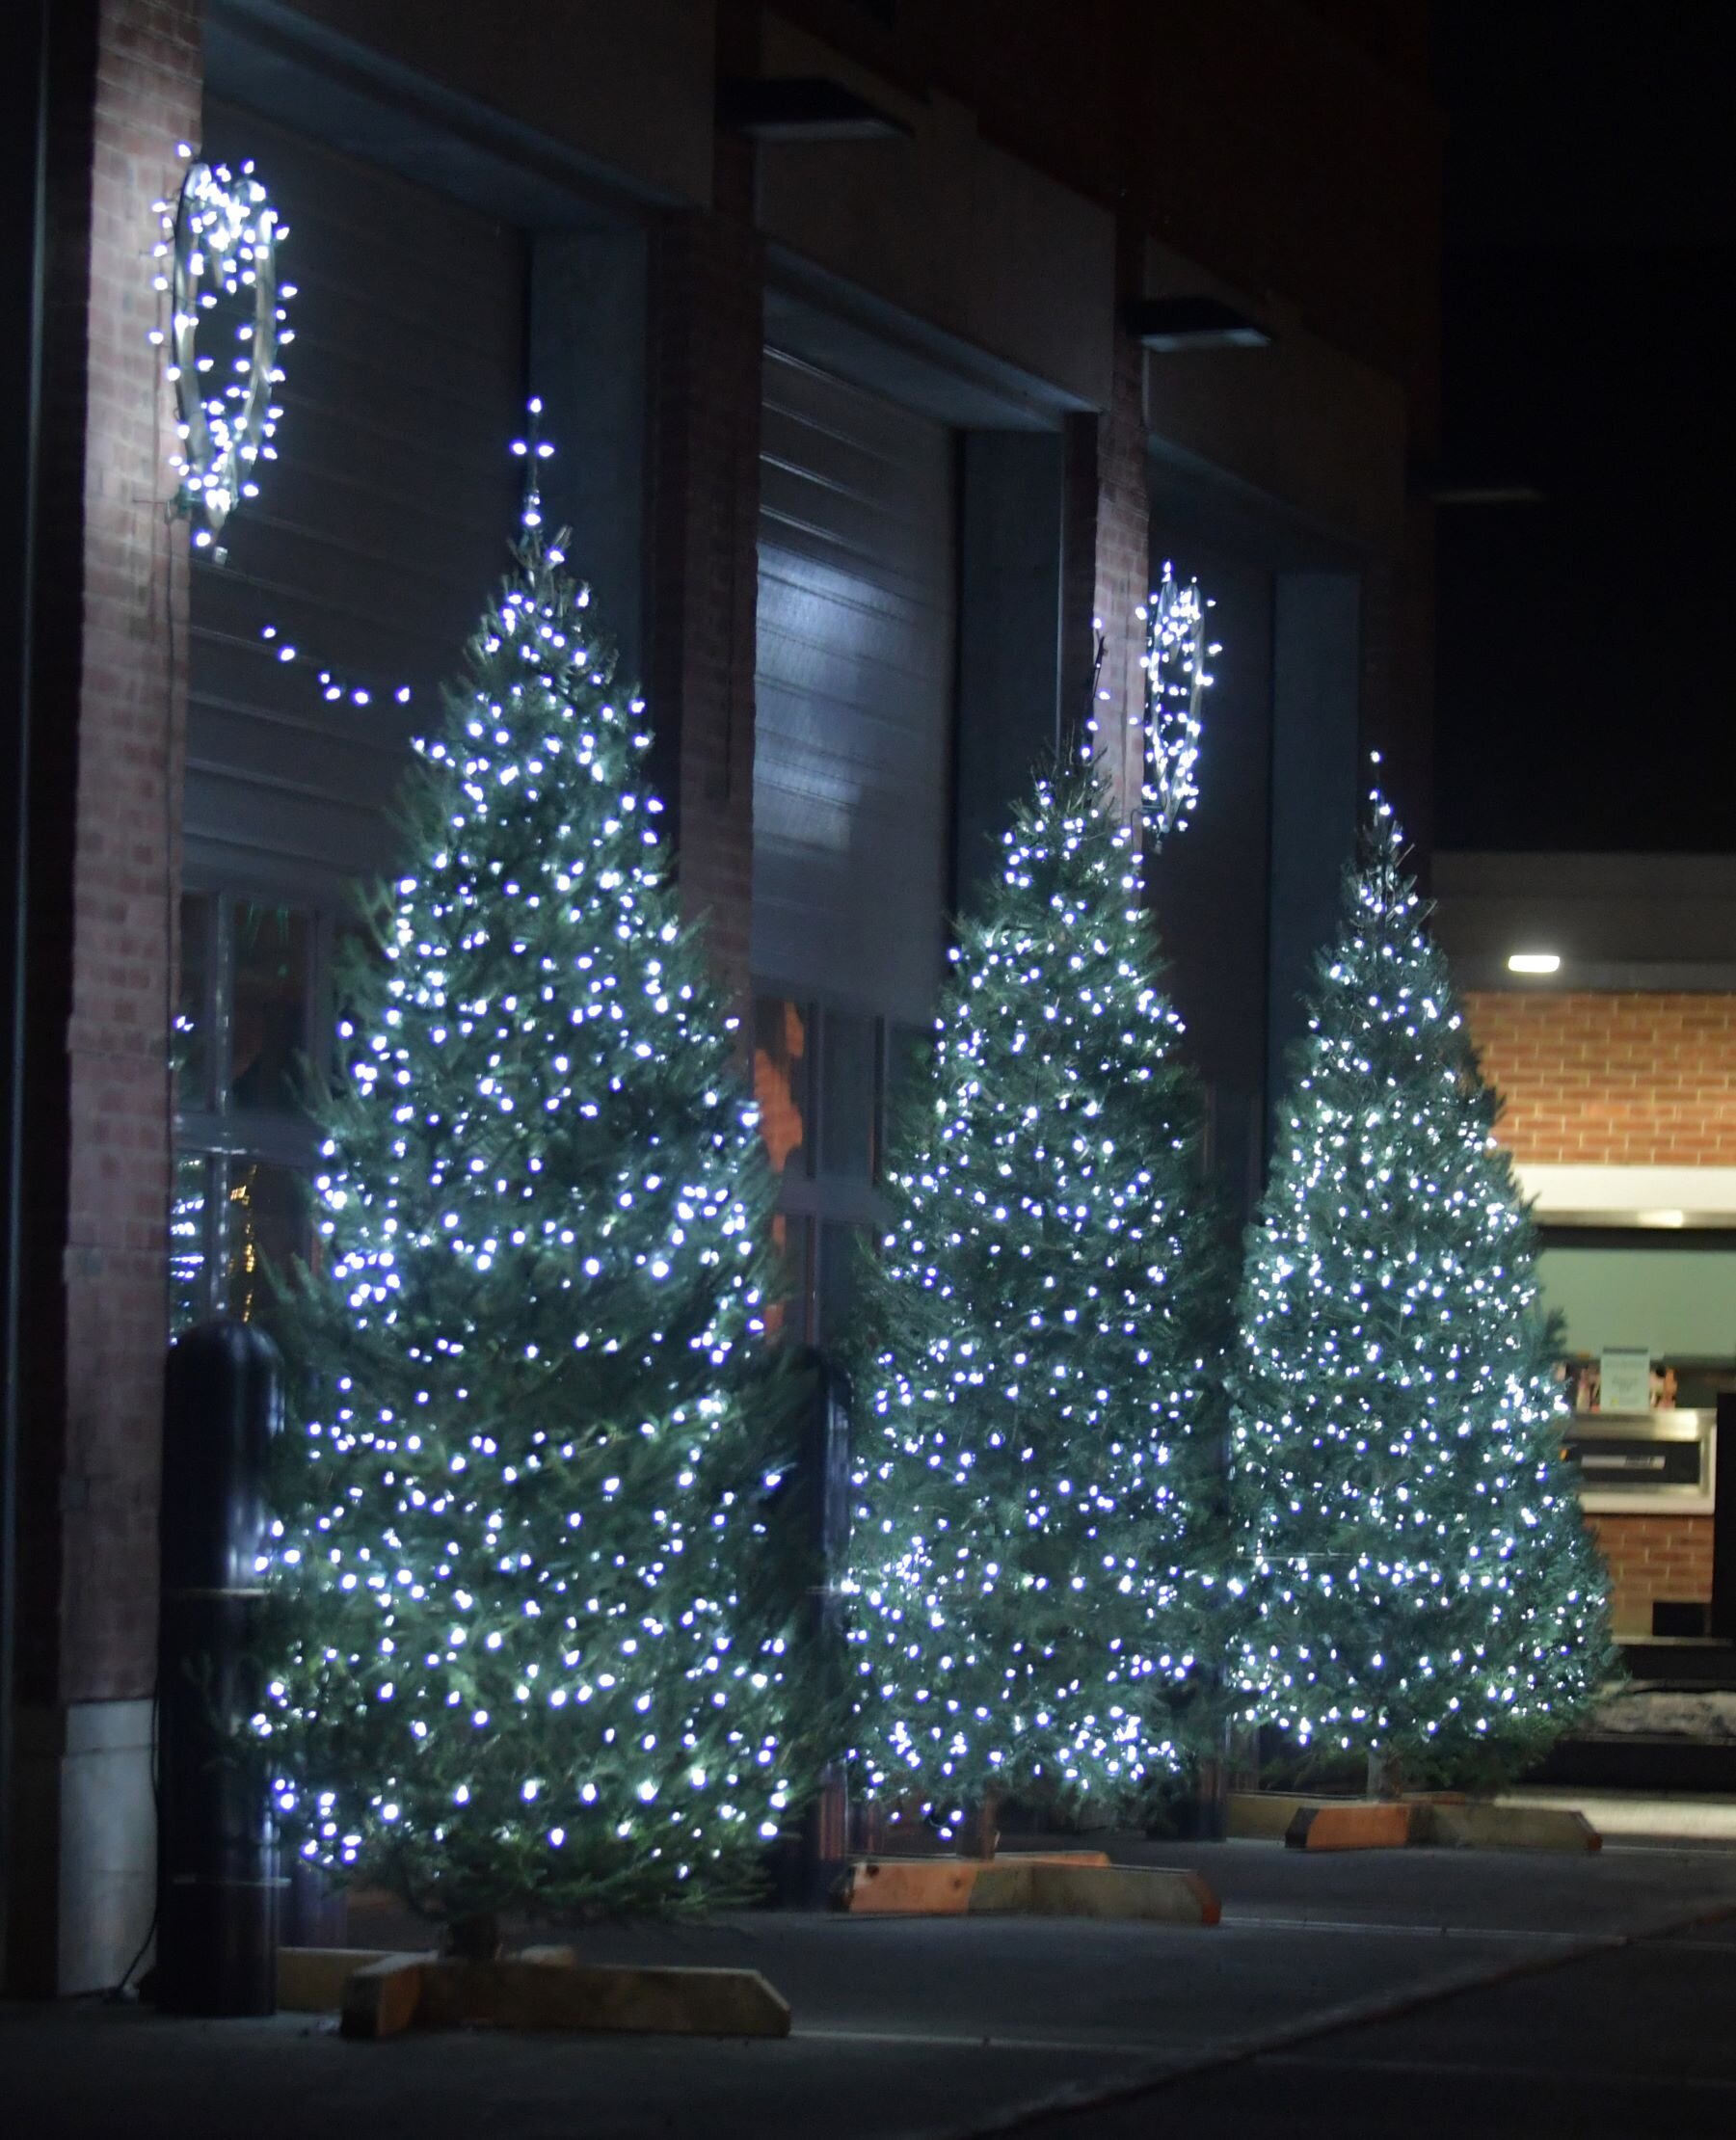   Waterbury Fire Department’s Main Street station is decked out as #vtlightstheway. Photo by Gordon Miller.  